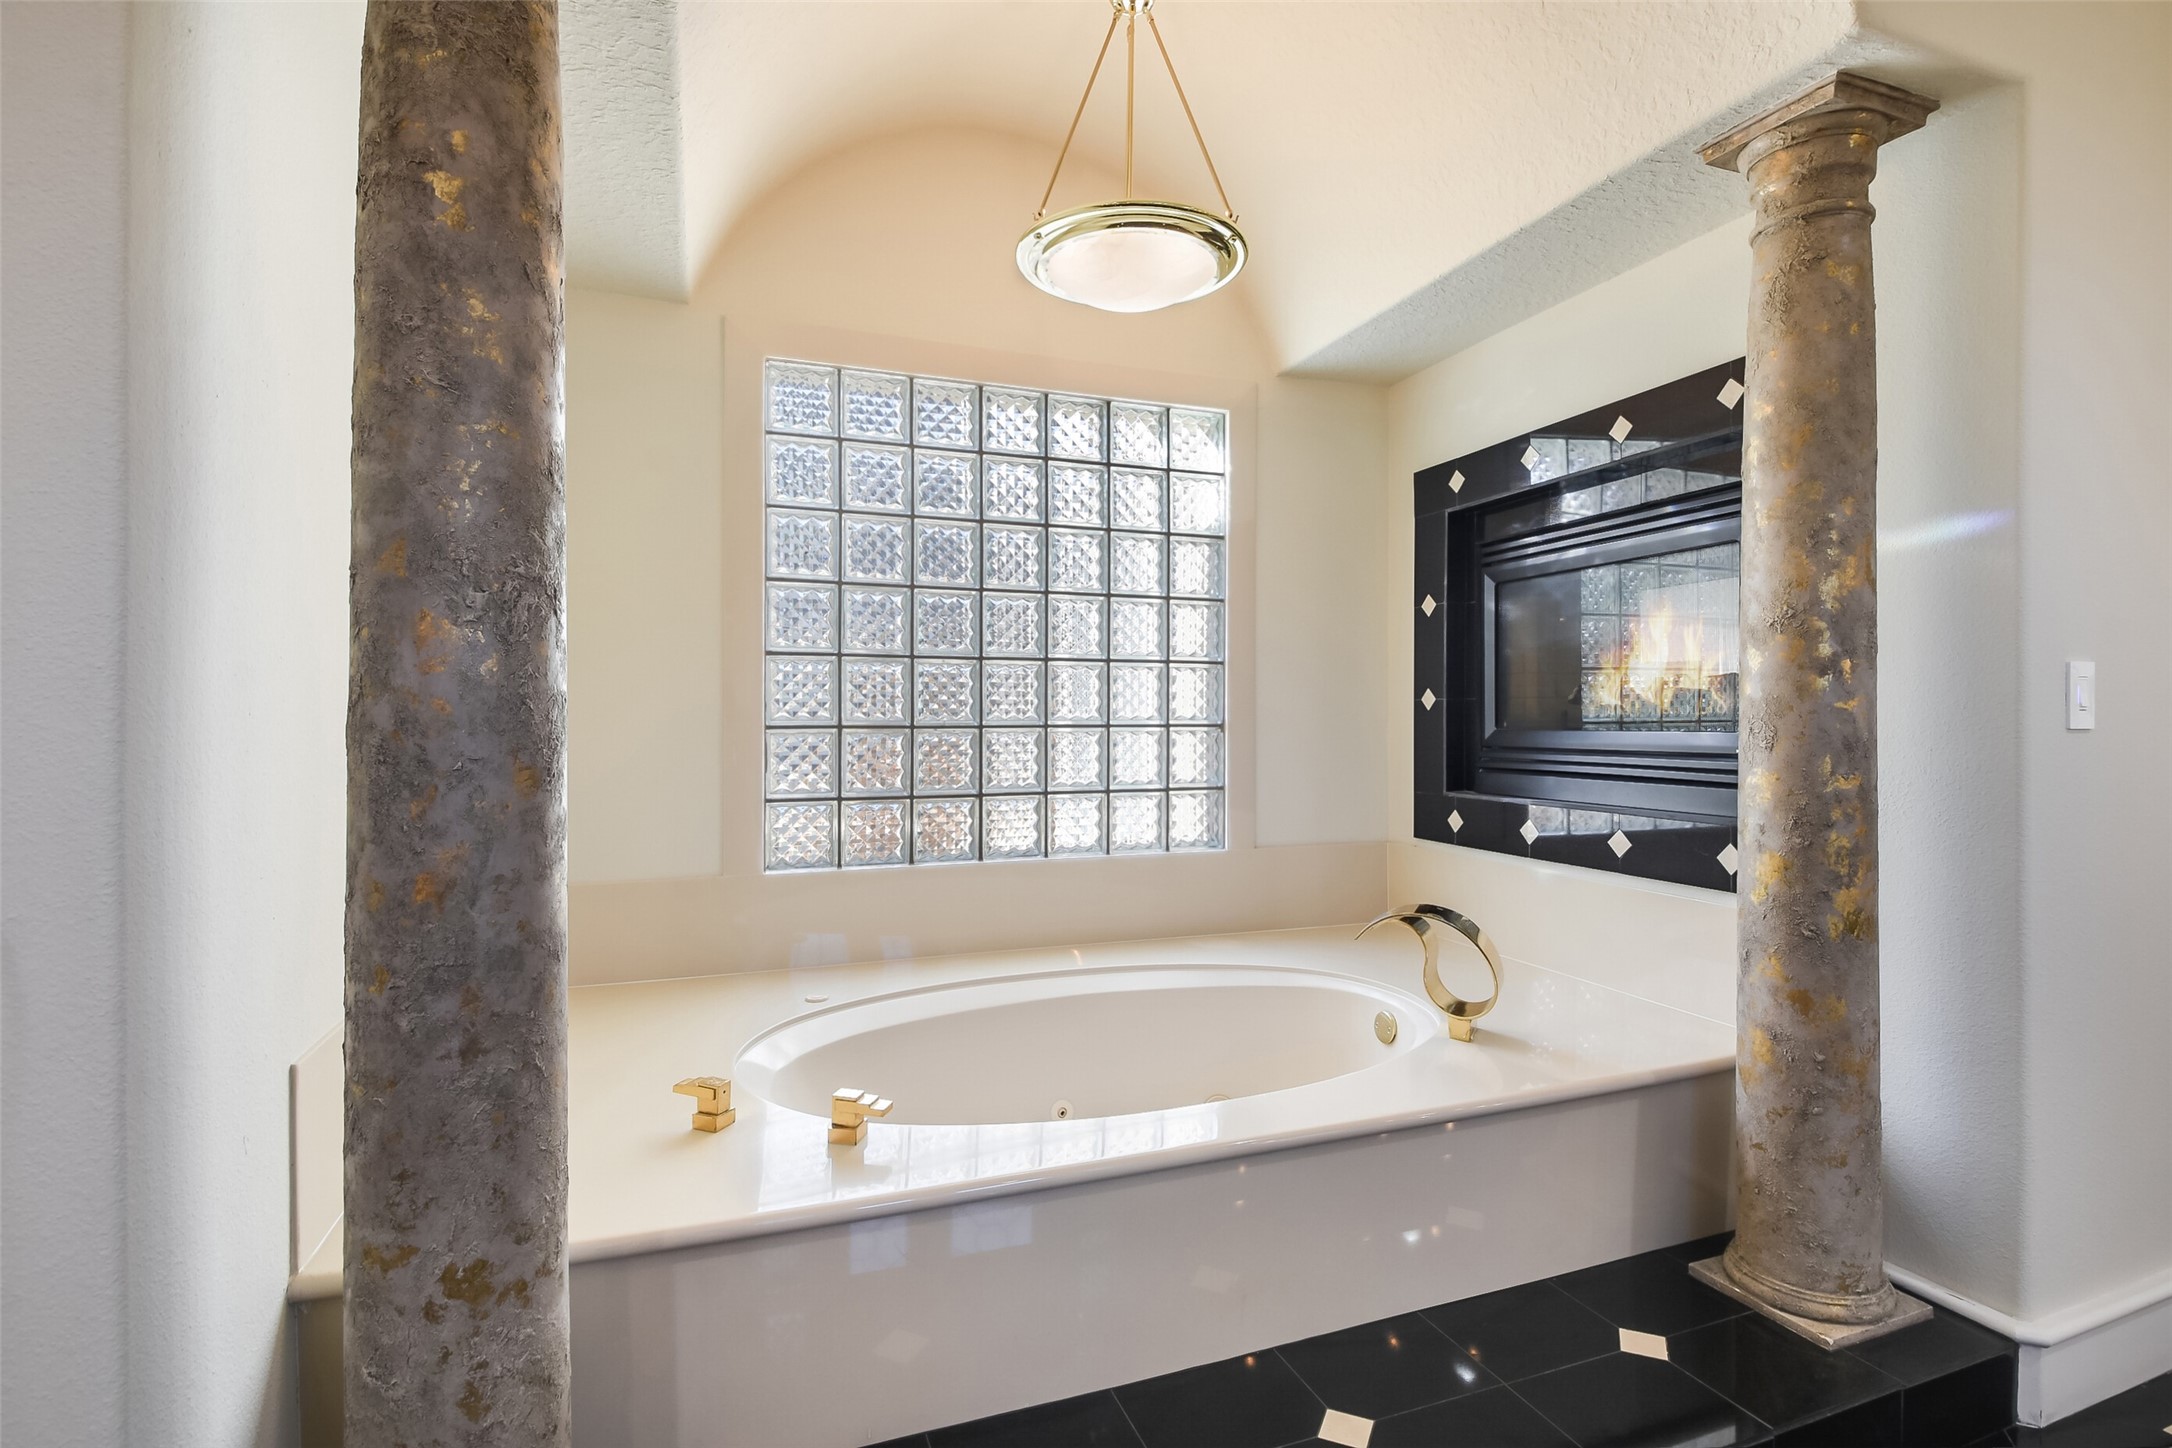 Relax in your jetted tub with elegant fixtures and view of the fireplace!